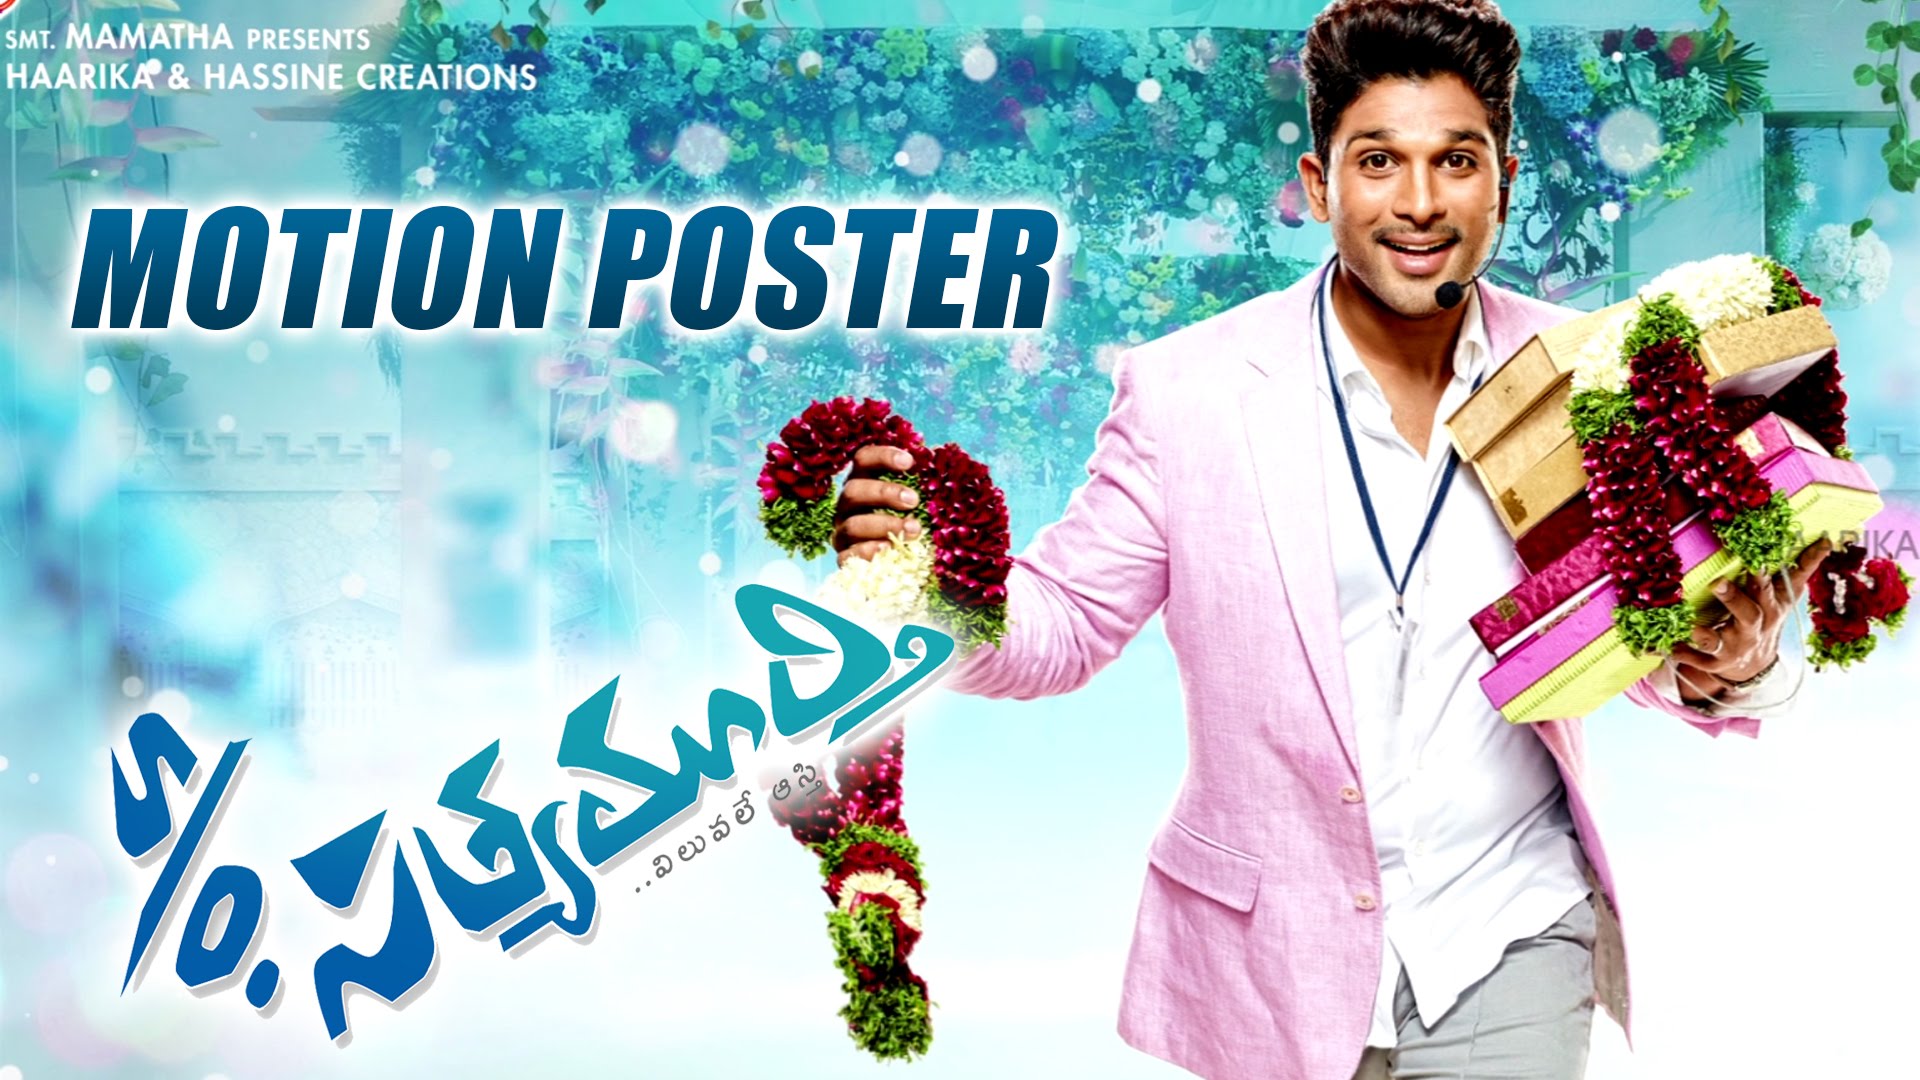 Images of S O Satyamurthy | 1920x1080